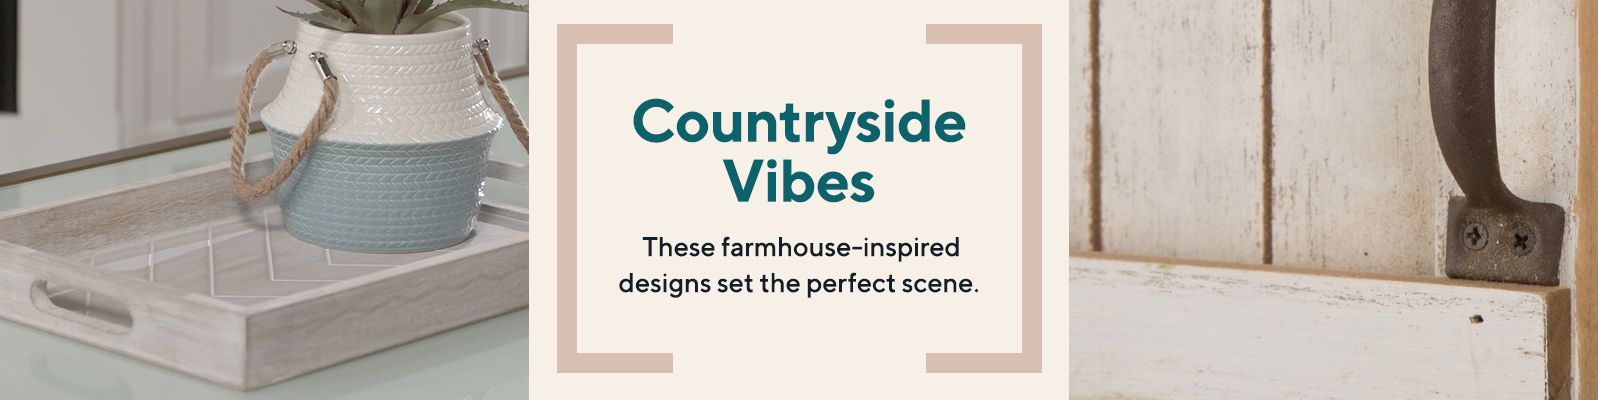 Countryside Vibes.  These farmhouse-inspired designs set the perfect scene.